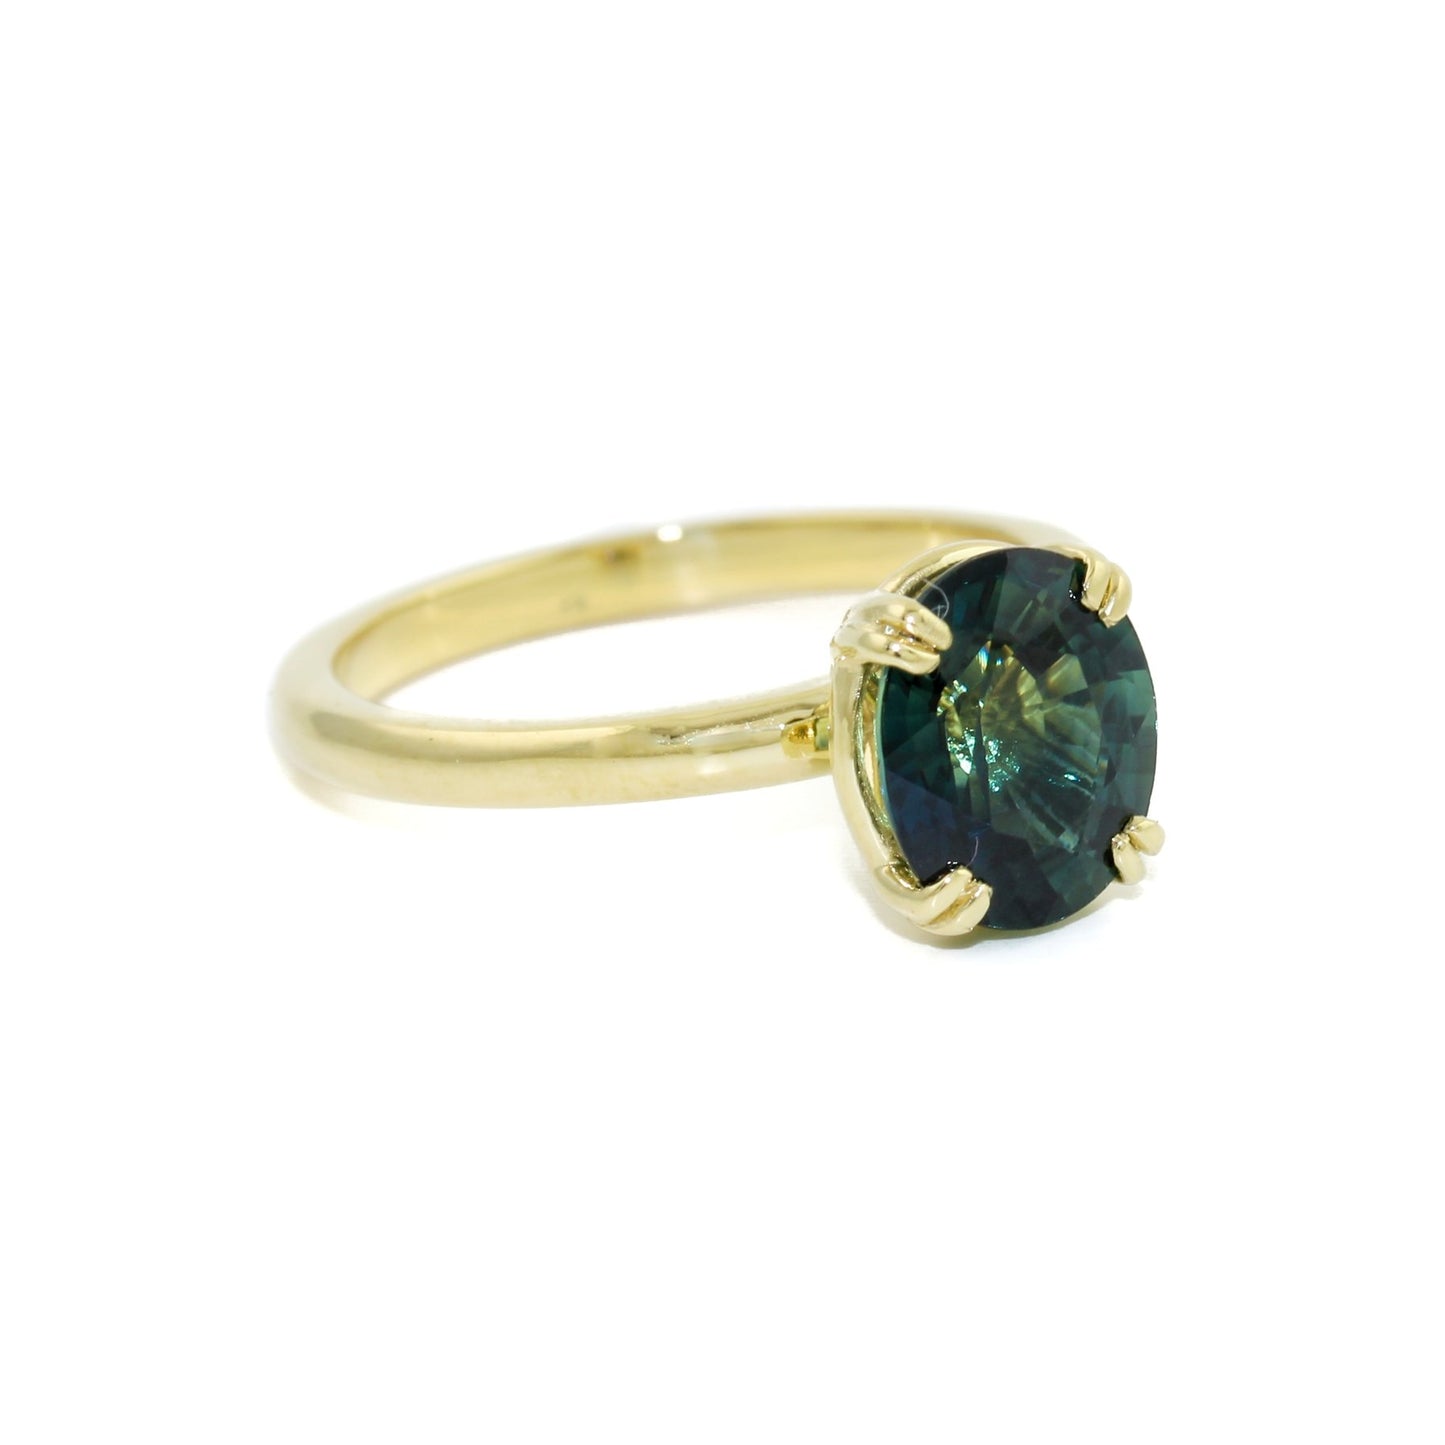 14 KT Gold Teal Sapphire Solitaire Ring - Kingdom Jewelry